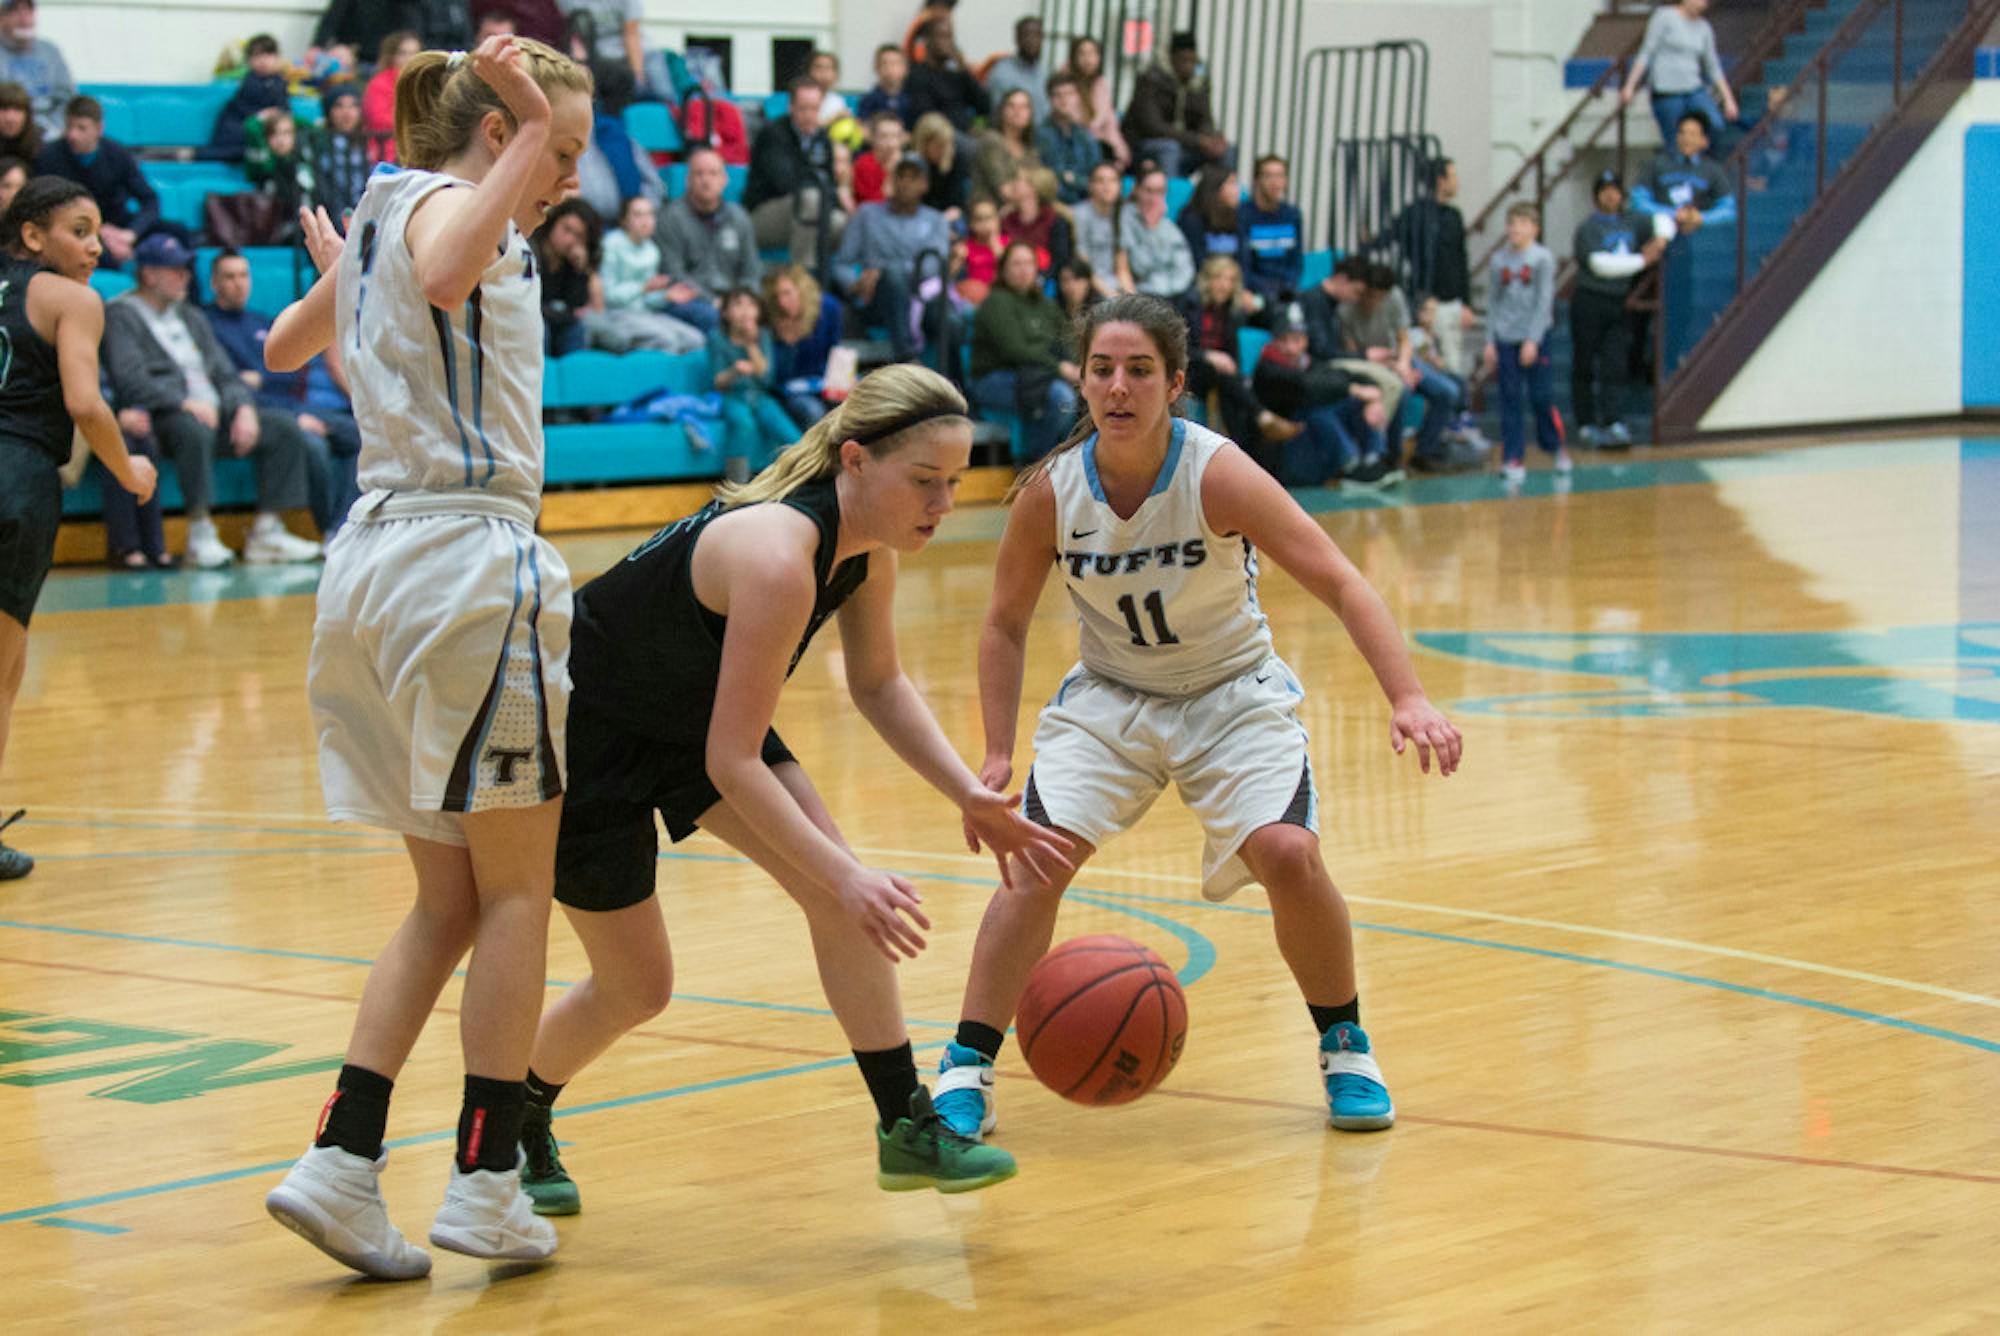 2017-03-04-Womens-Basketball-Tufts-at-Husson-31